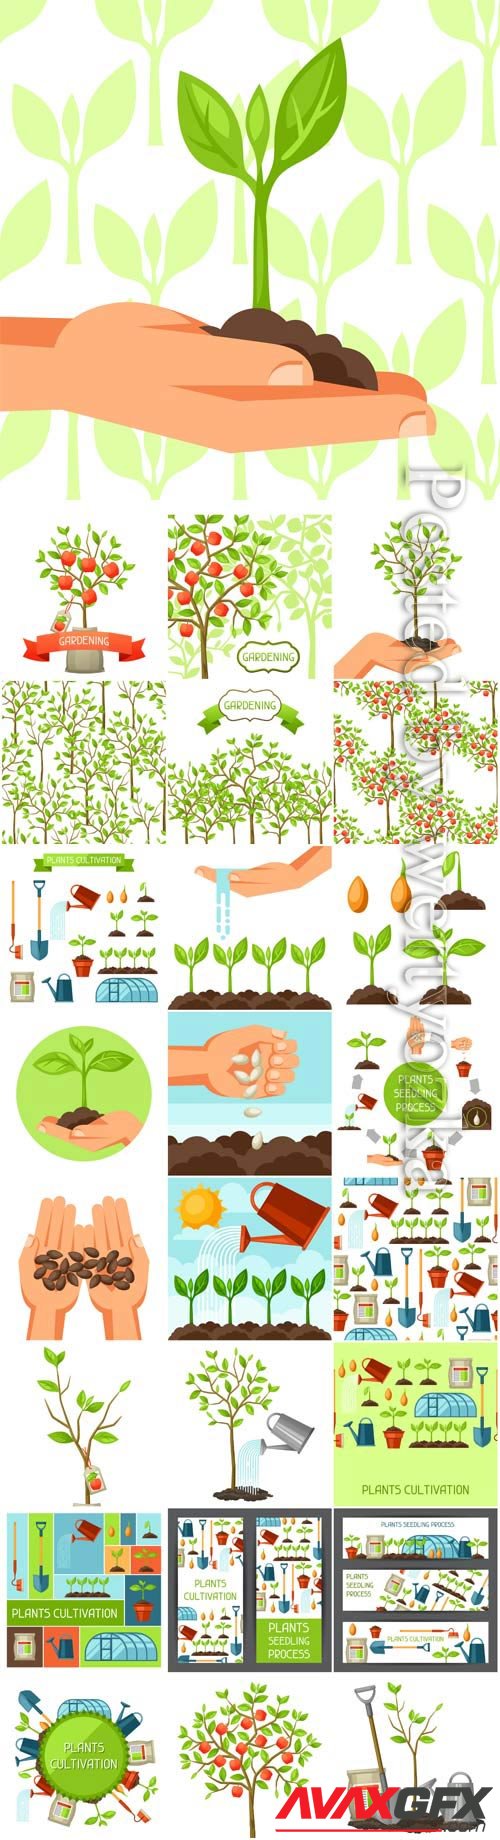 Gardening, nature and people concept in vector